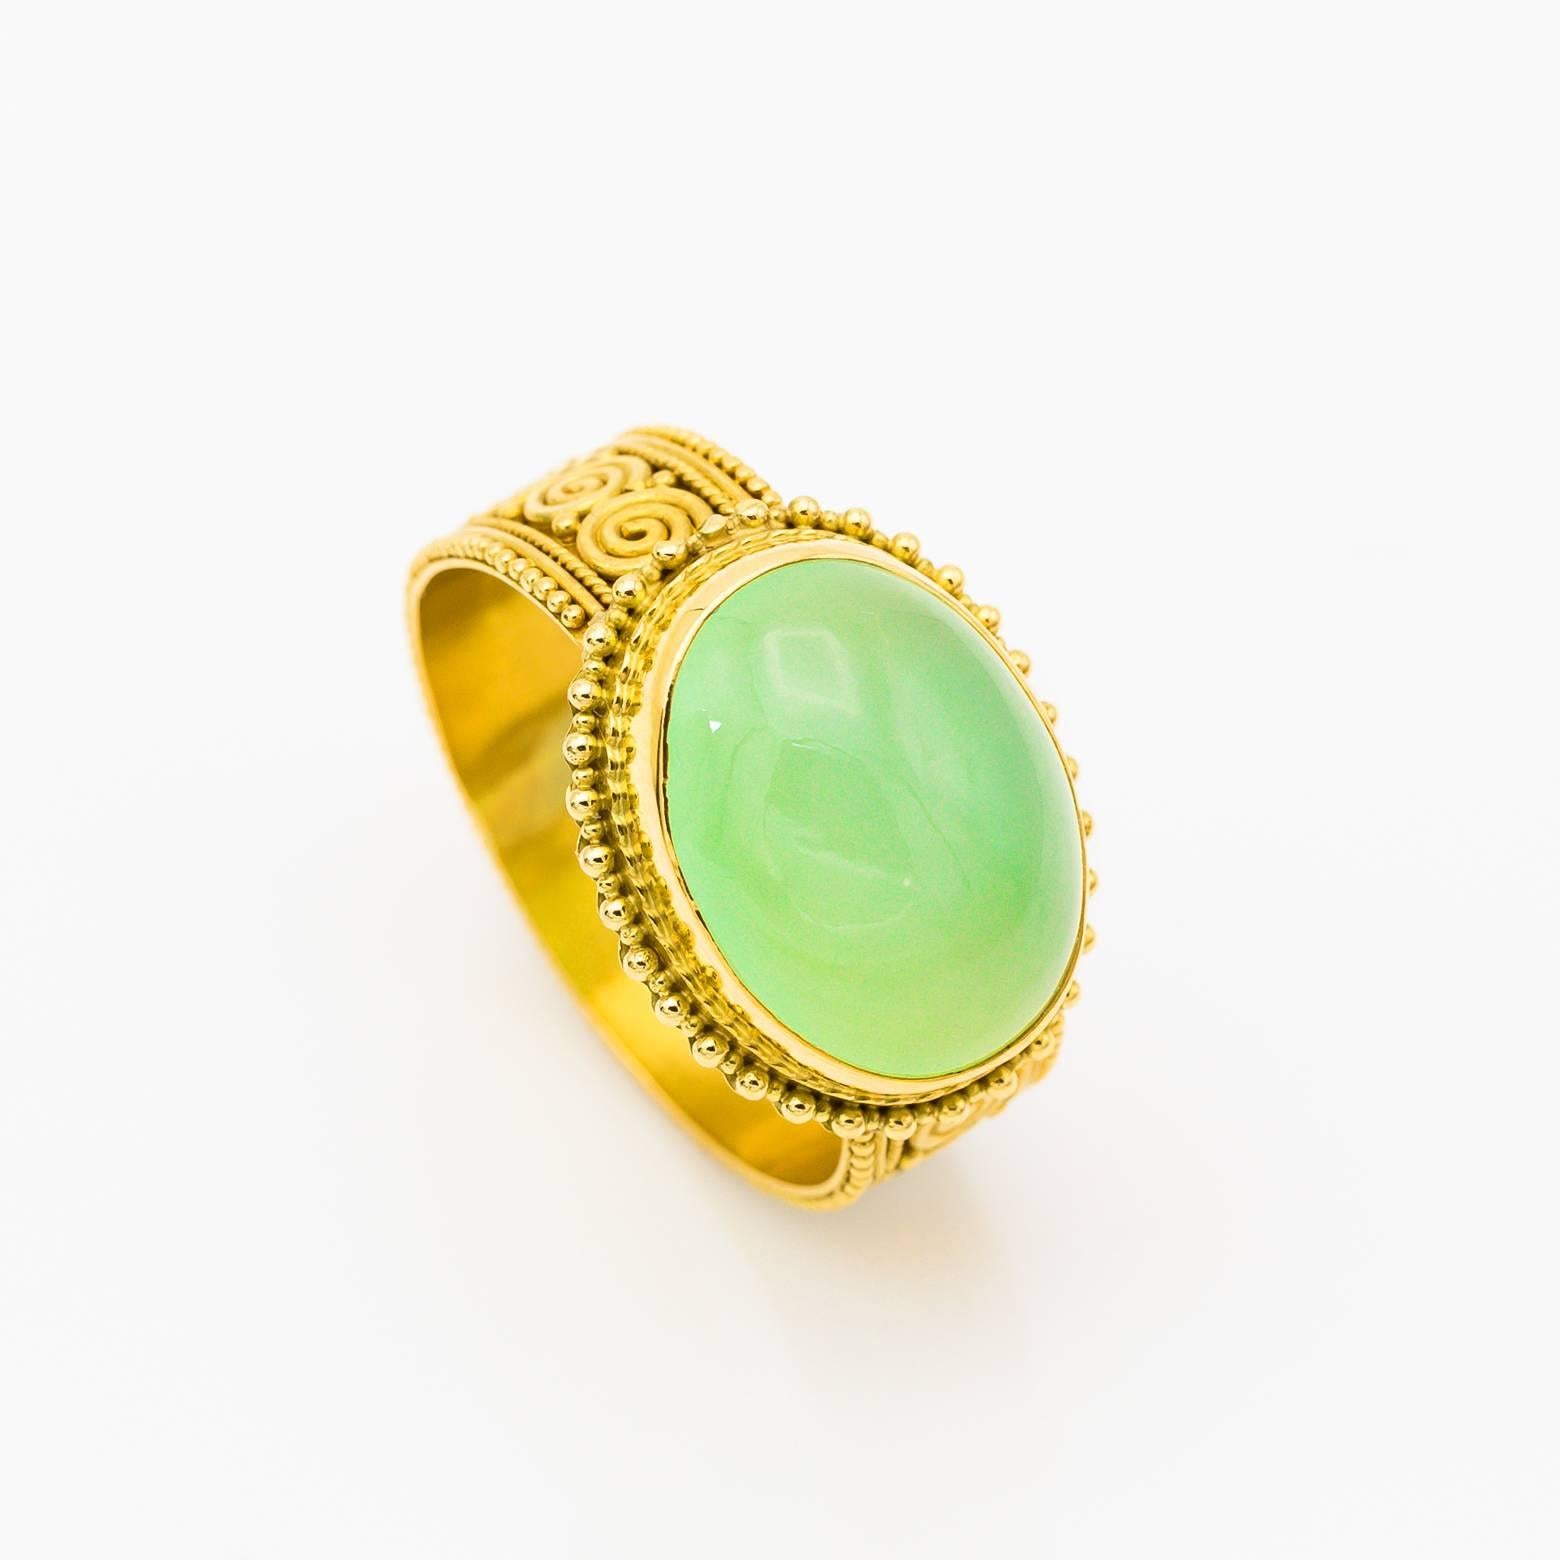 An oval Chalcedony is decorated in 22K yellow gold with intricate spiral detail handmade by one of our favorite designers. The bright yellow of the high carat gold glows with a creamy cloudy chalcedony in the middle. One of a kind and spectacular!